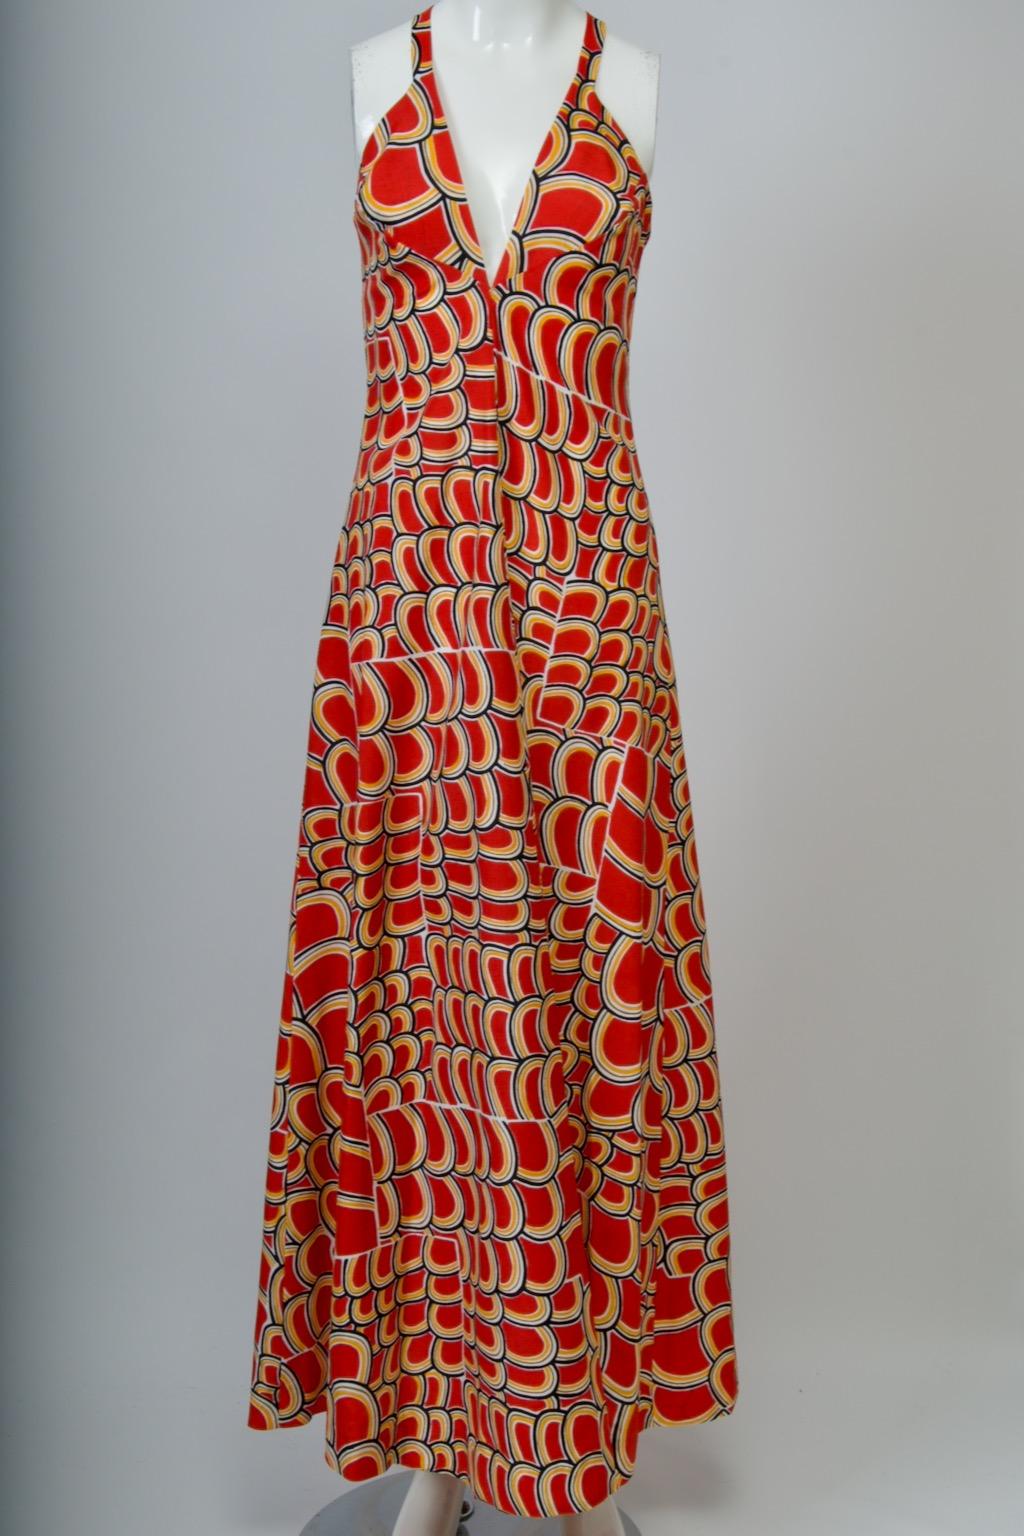 Odette Barsa was primarily renowned for her exquisite lingerie, produced from the 1930s-1970s, and this vibrant red print ensemble may have been originally intended as a hostess outfit. Today it can make the perfect splash for a summer event at home